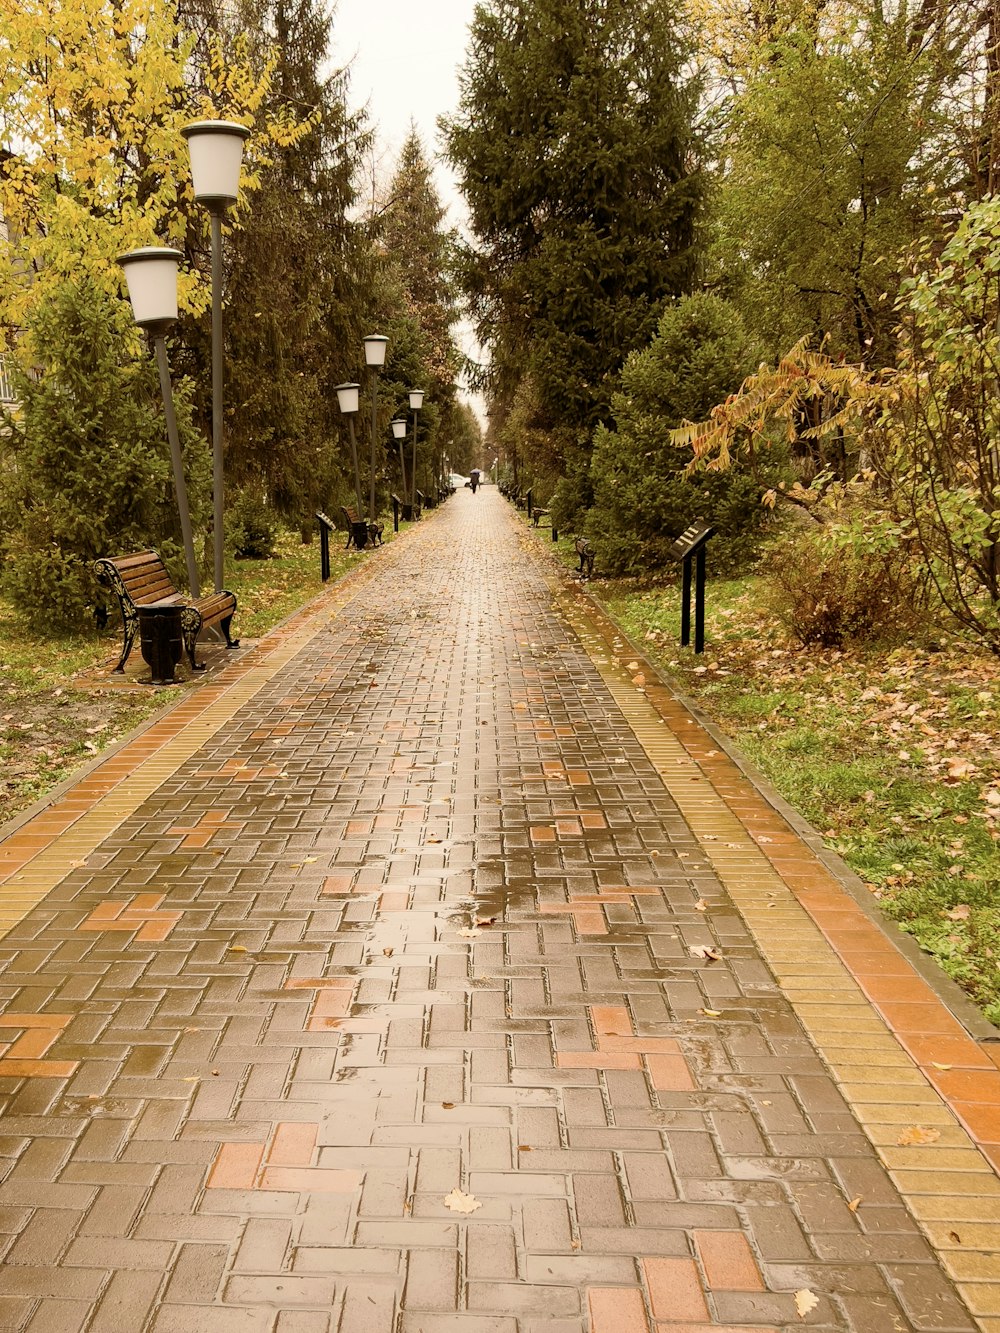 a brick road with a bench on the side of it